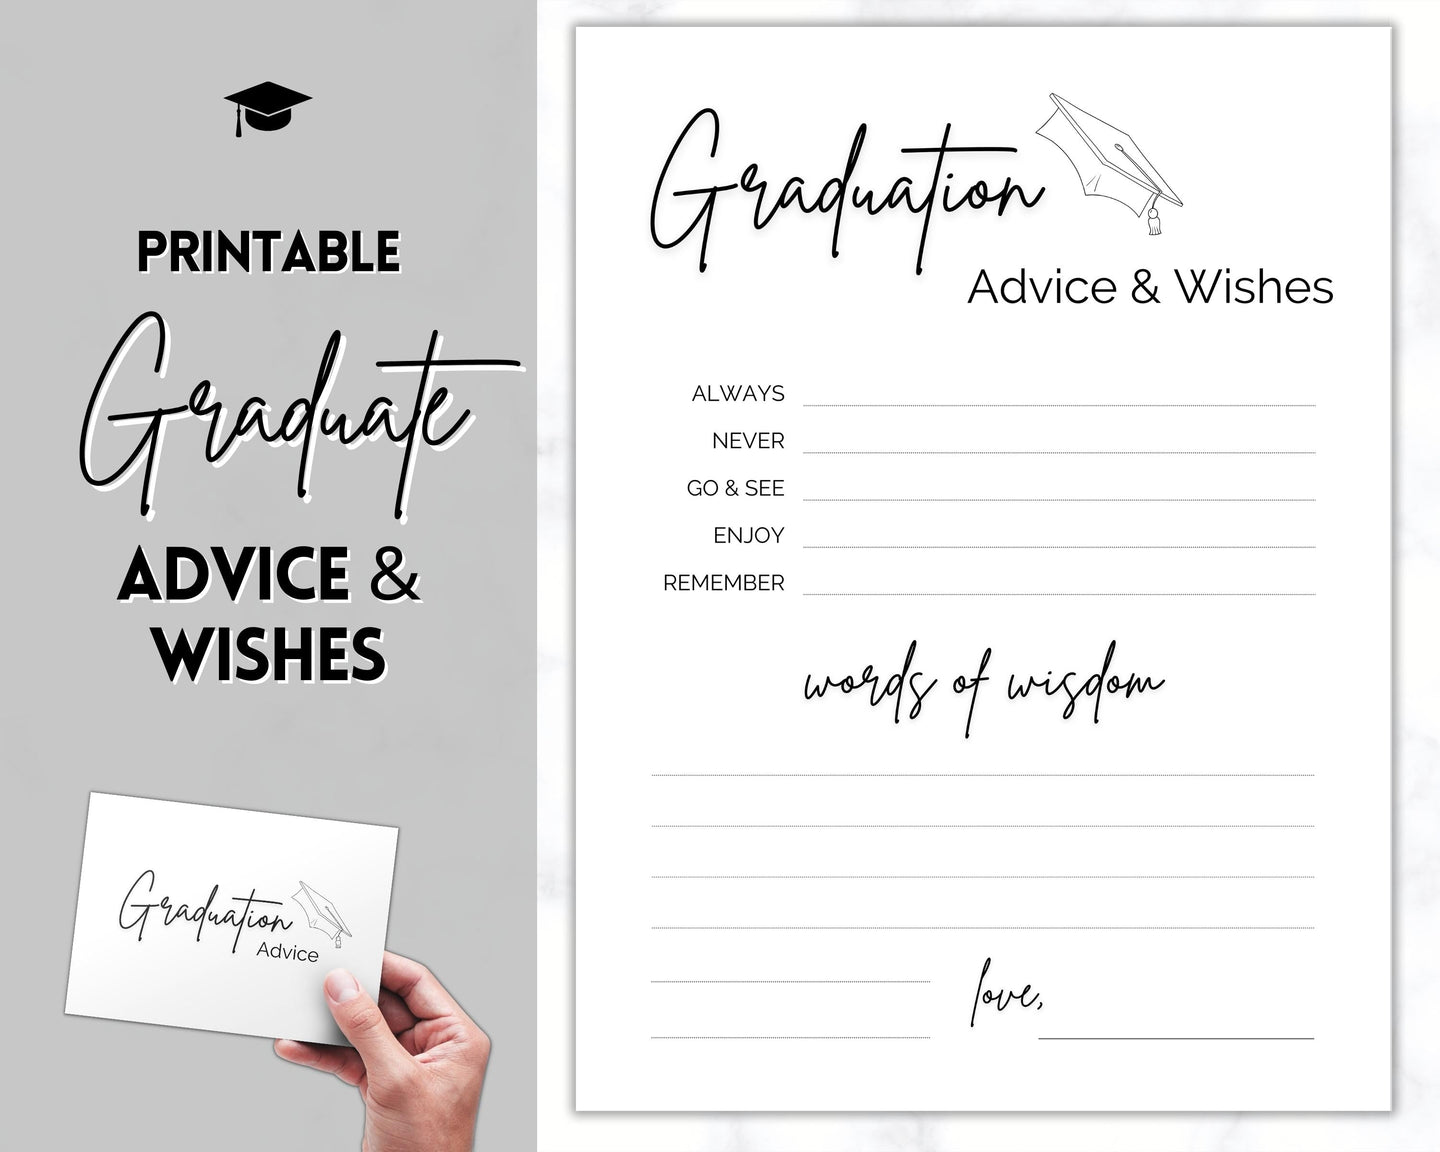 Printable Words of Wisdom Card, Graduation Advice & Wishes Party Poster Template, Graduate, College, High School Grad, Class of 2022, Advice Poster, Advice Card